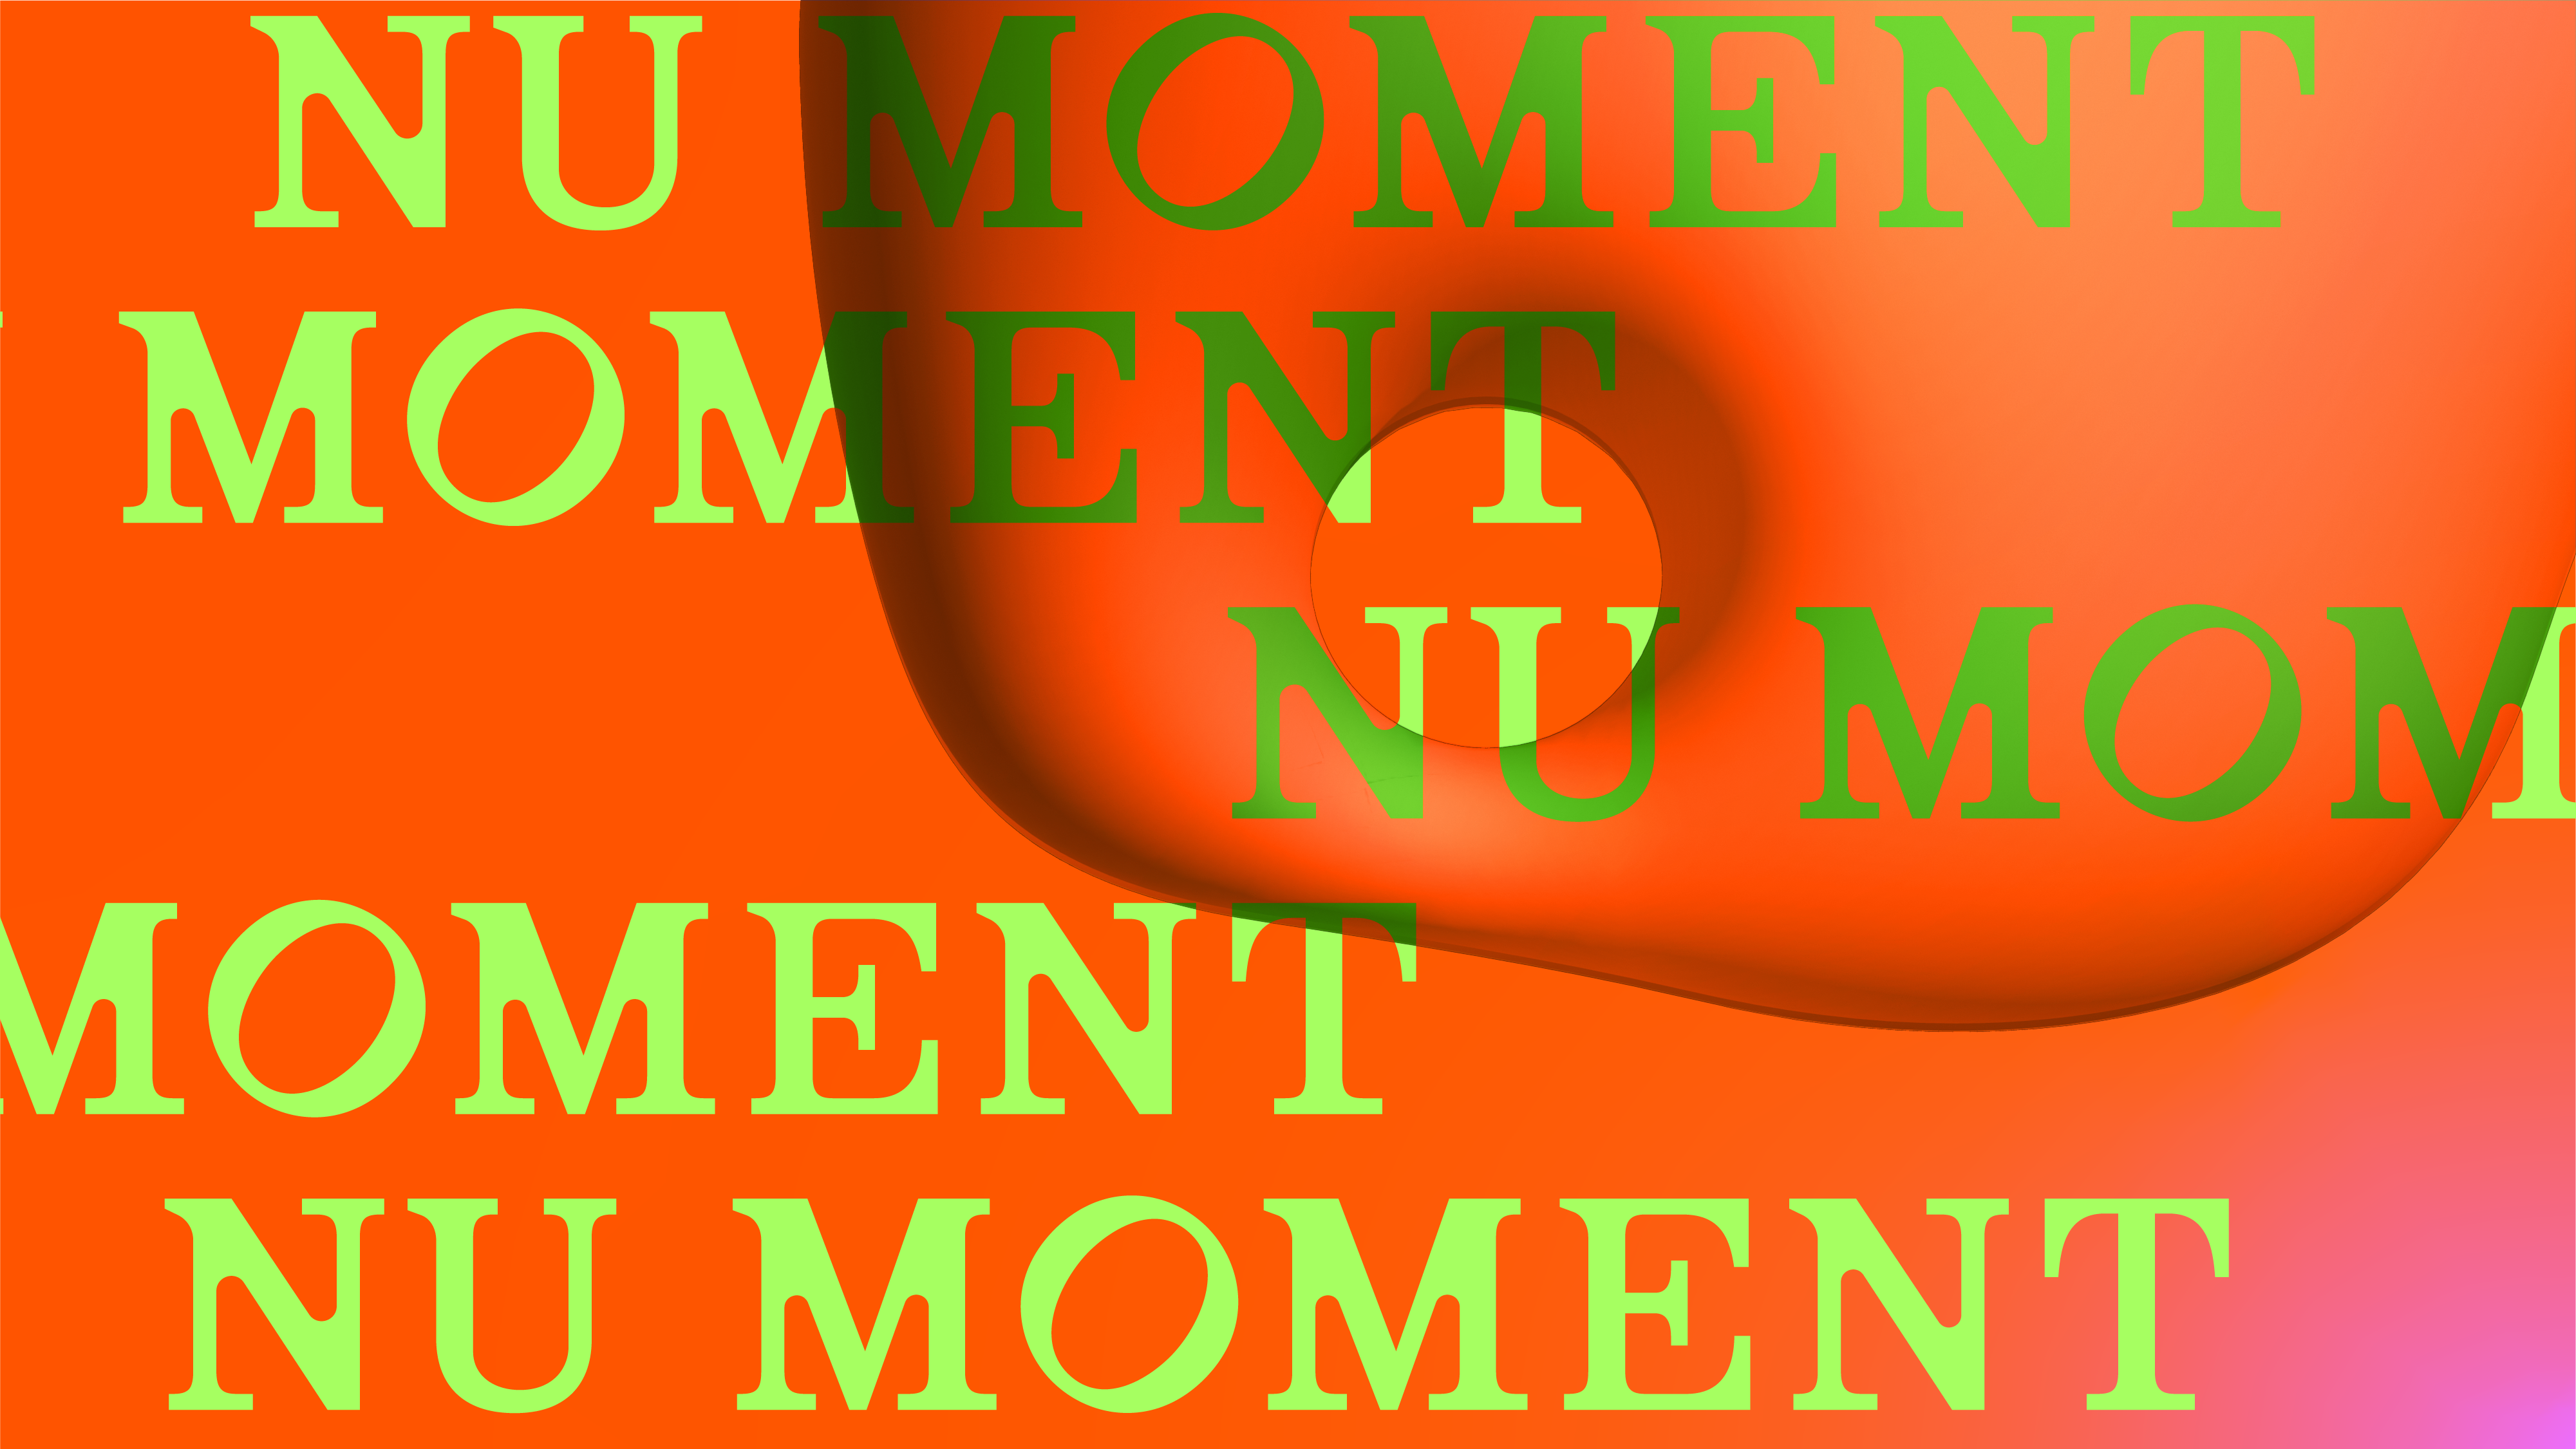 An orange toned banner decorative light green neon type repeating 'NU MOMENT'